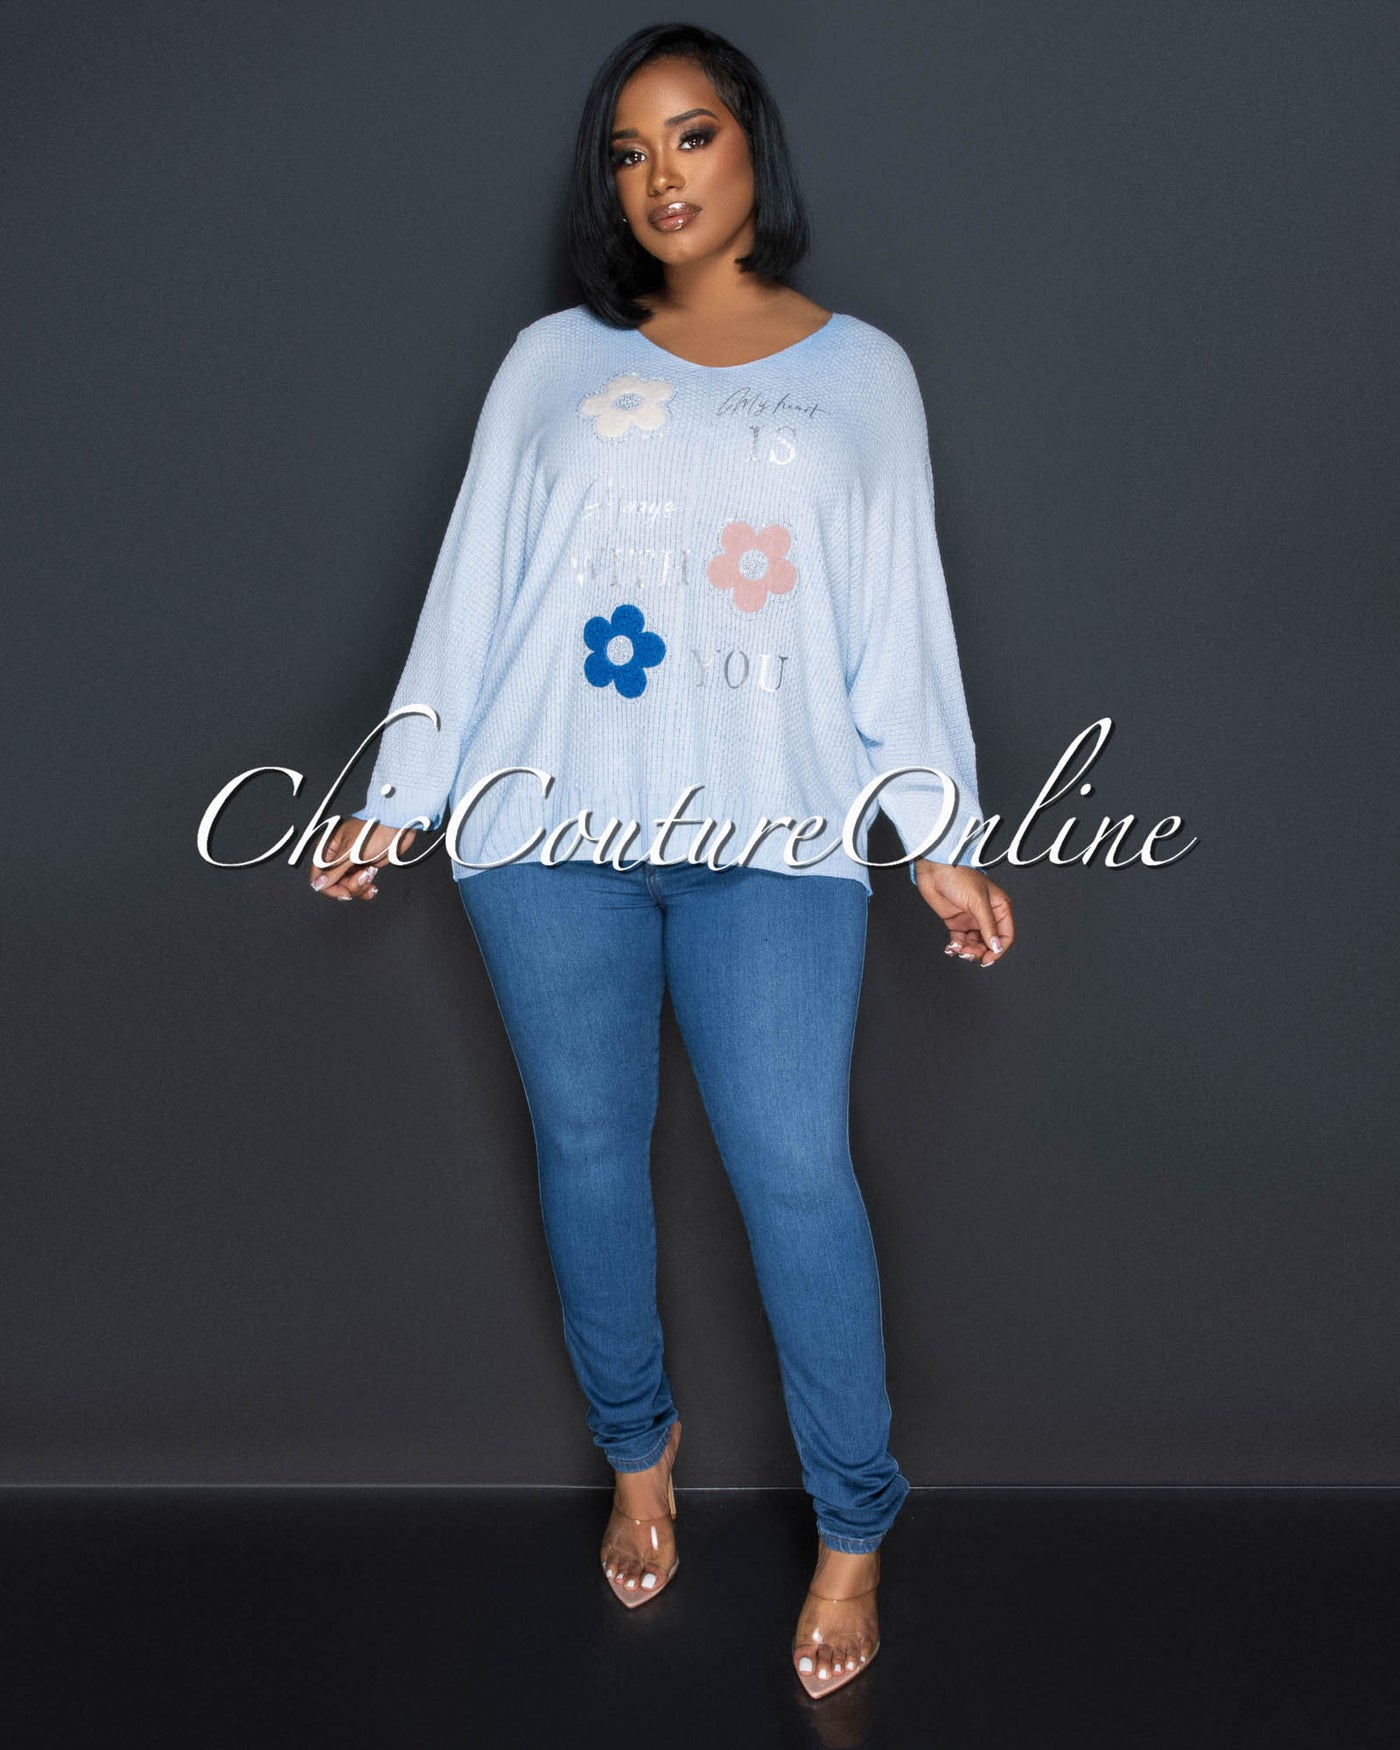 *Lucian Baby Blue Flowers Accent Knit Sweater